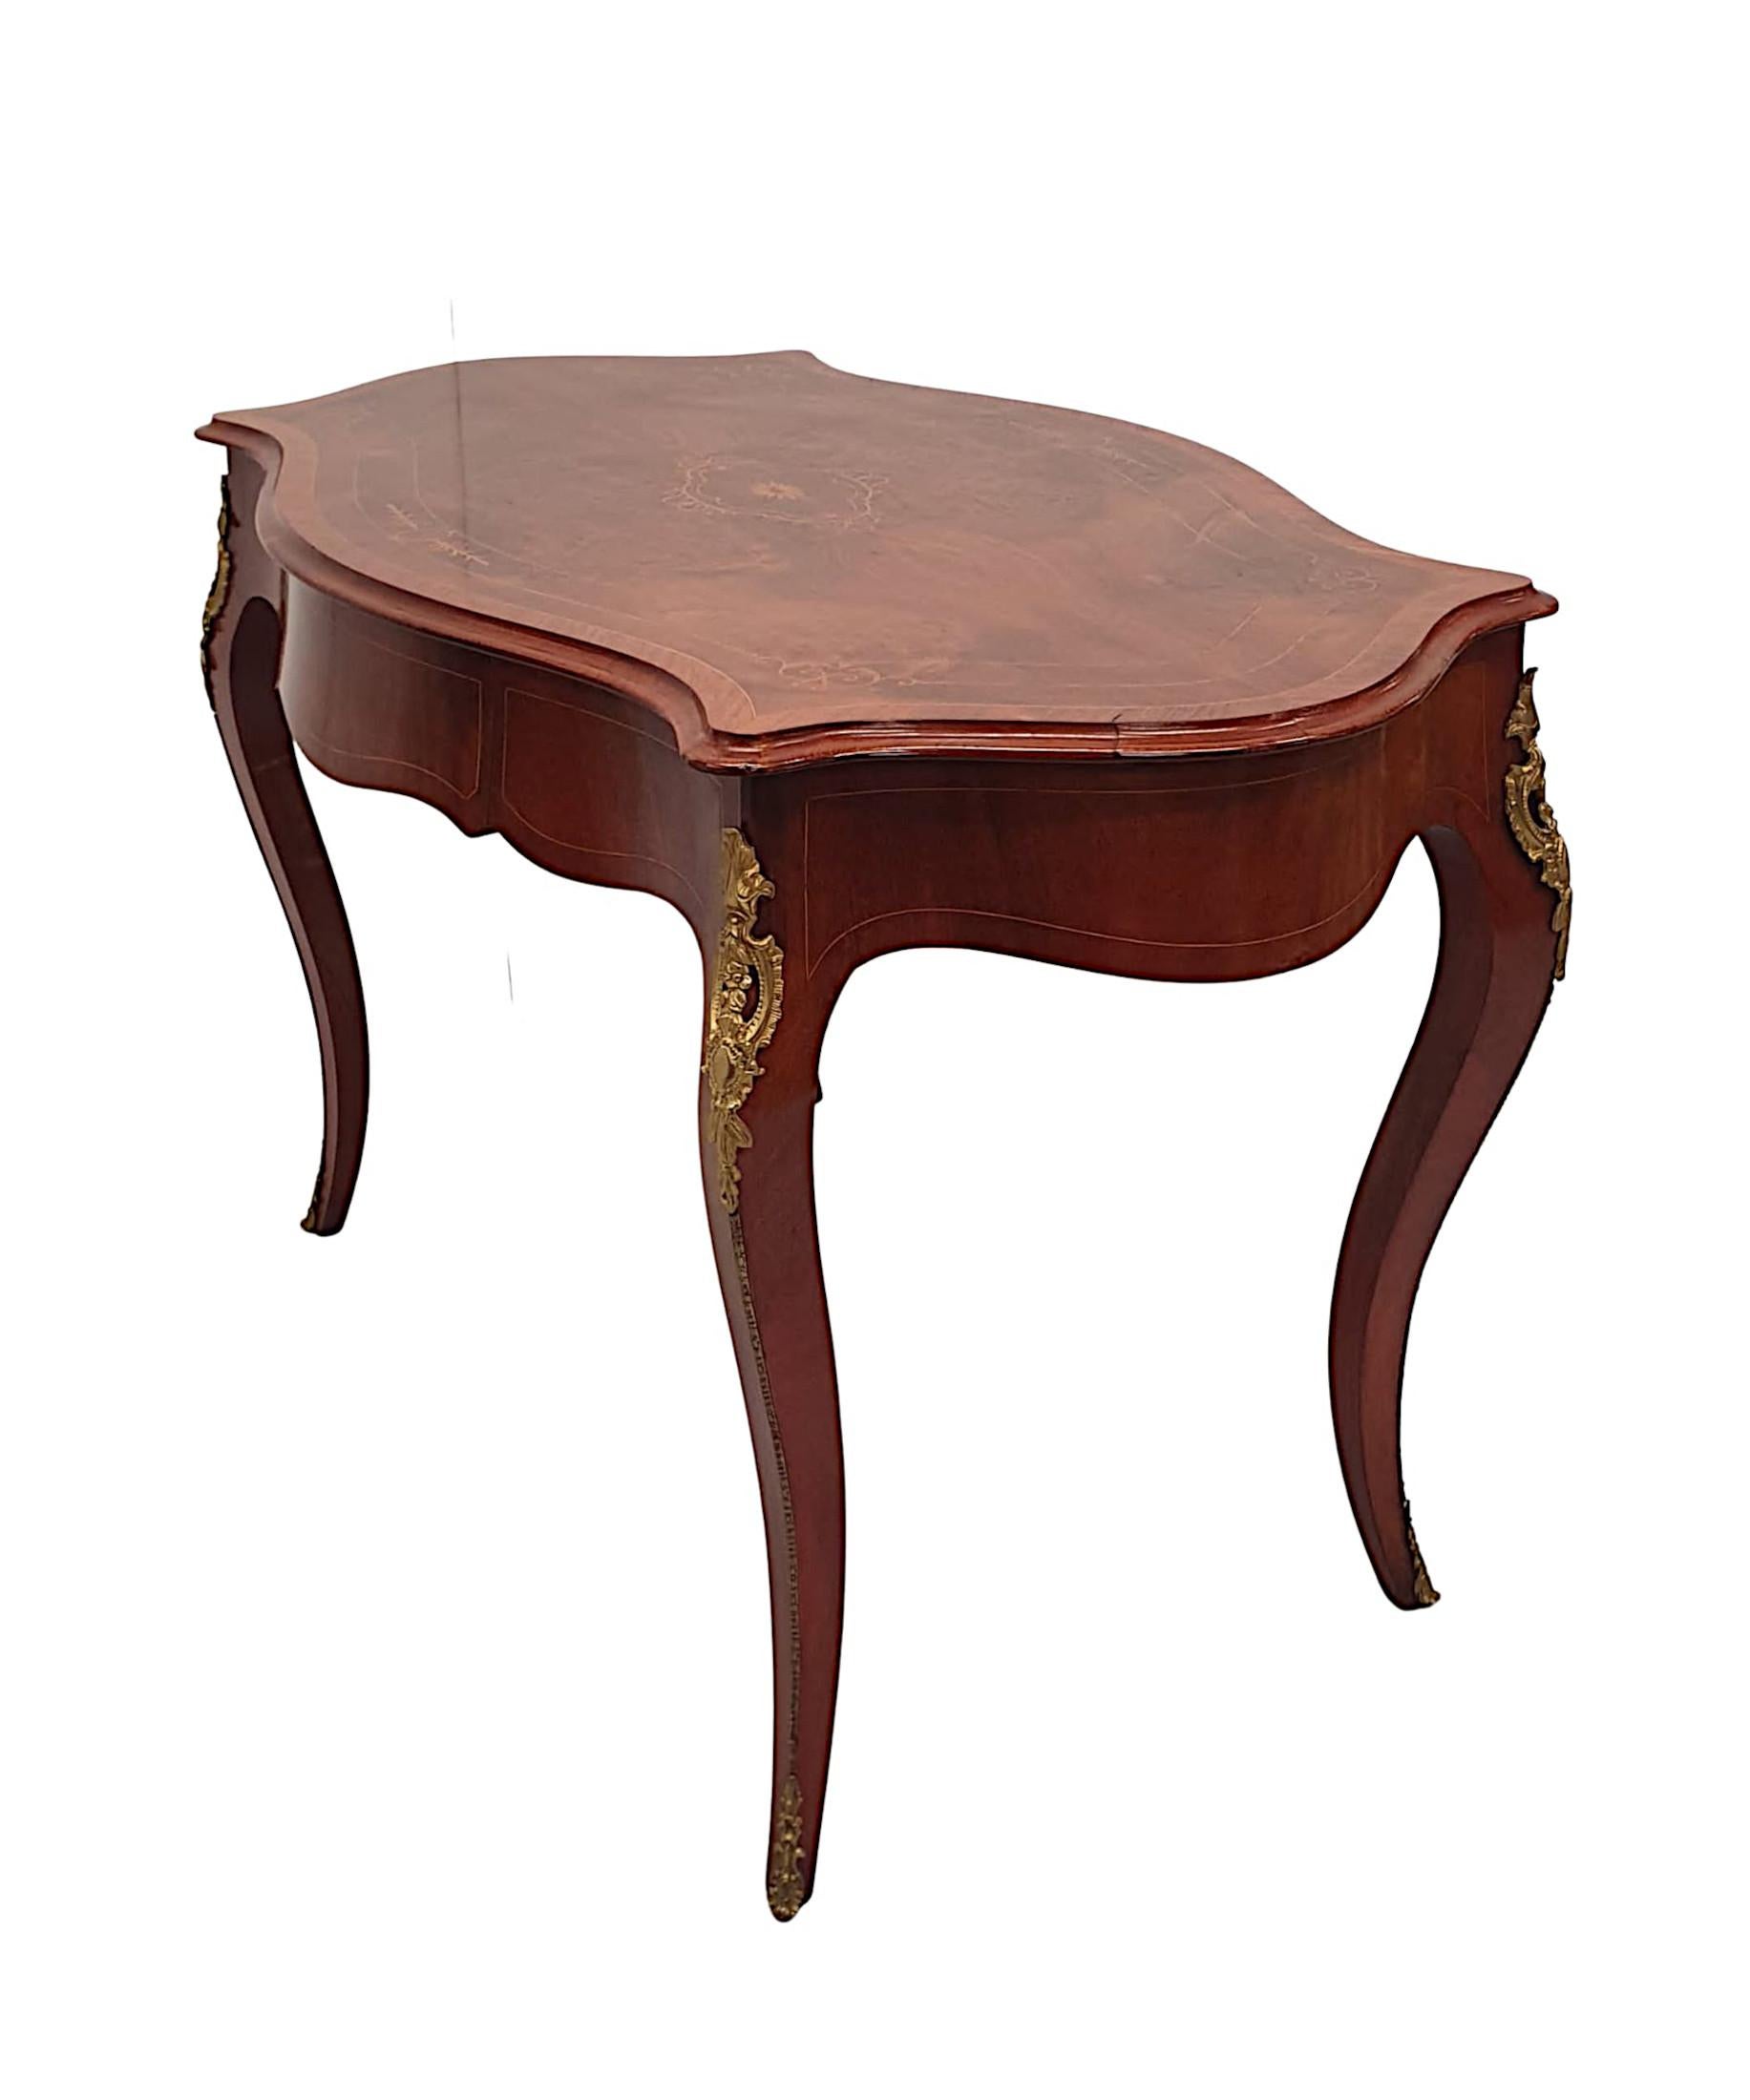 English Fabulous 19th Century Side Table or Desk For Sale